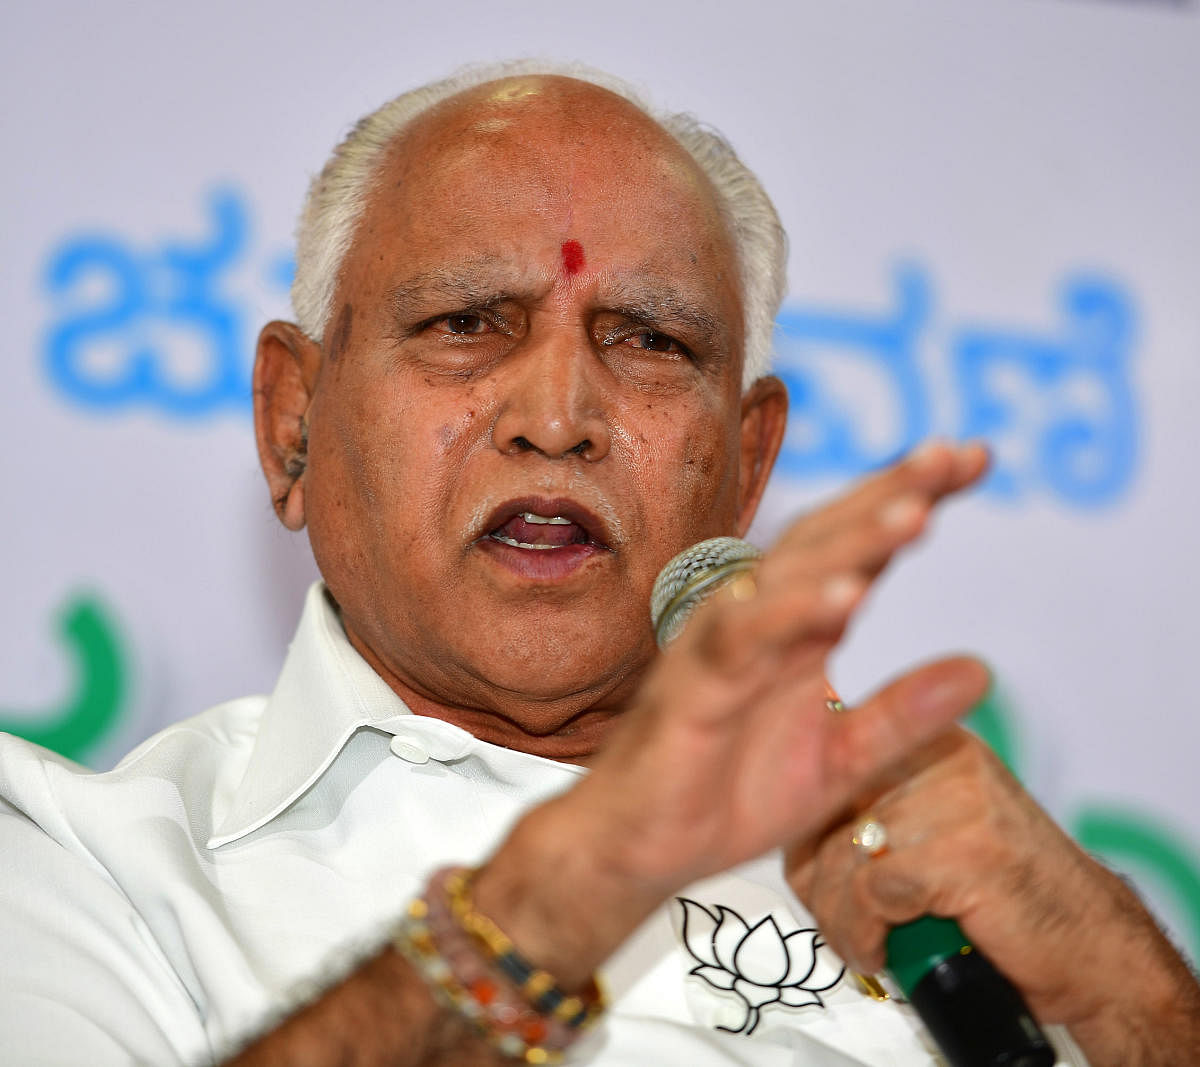 BJP will not dislodge the govt: BSY